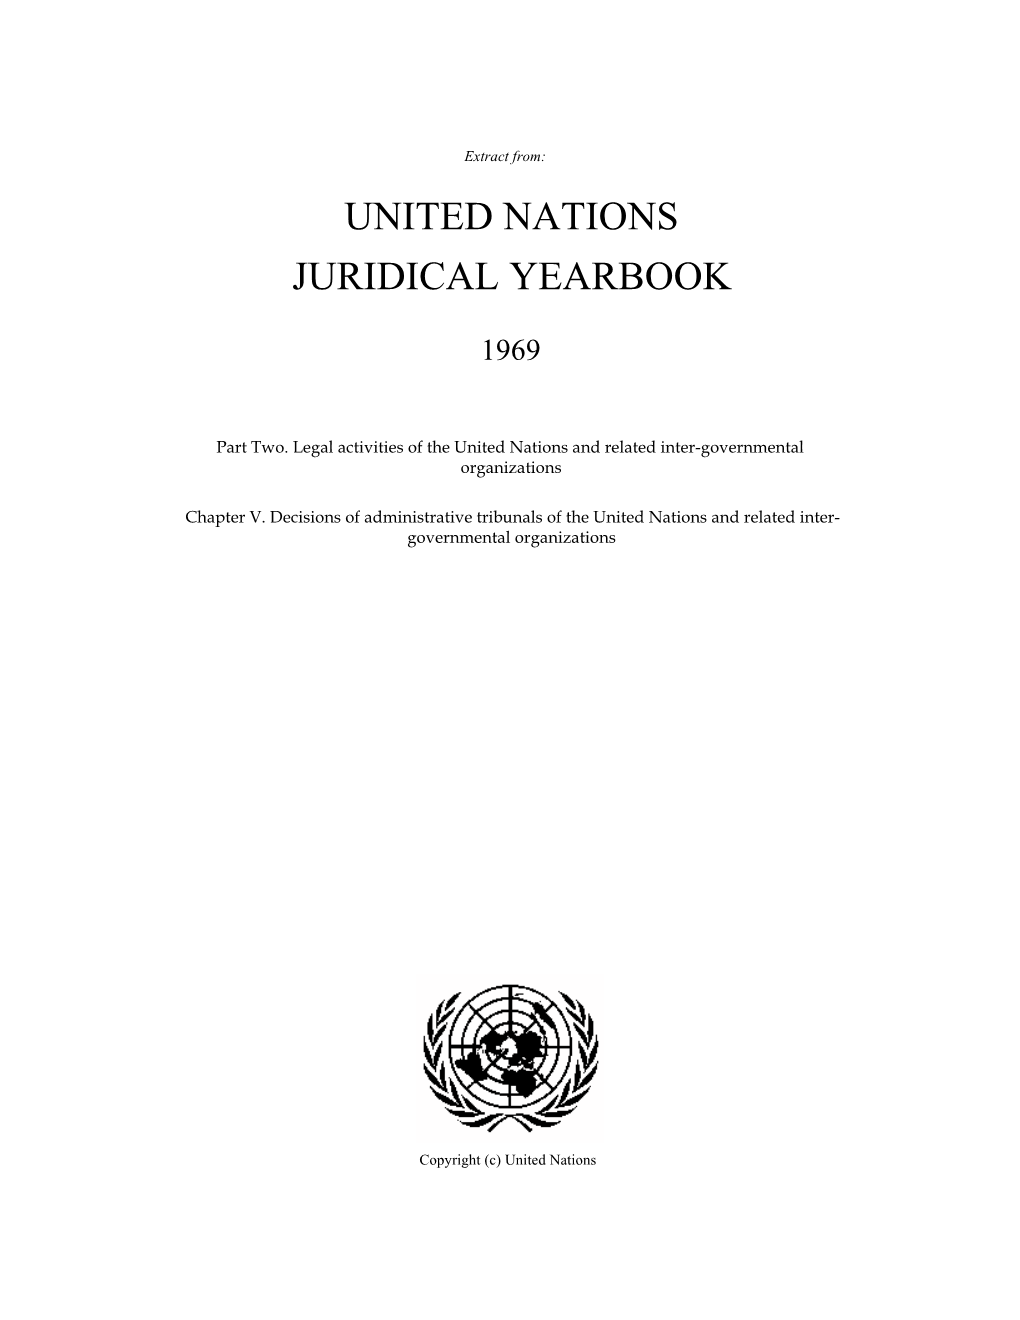 United Nations Juridical Yearbook, 1969